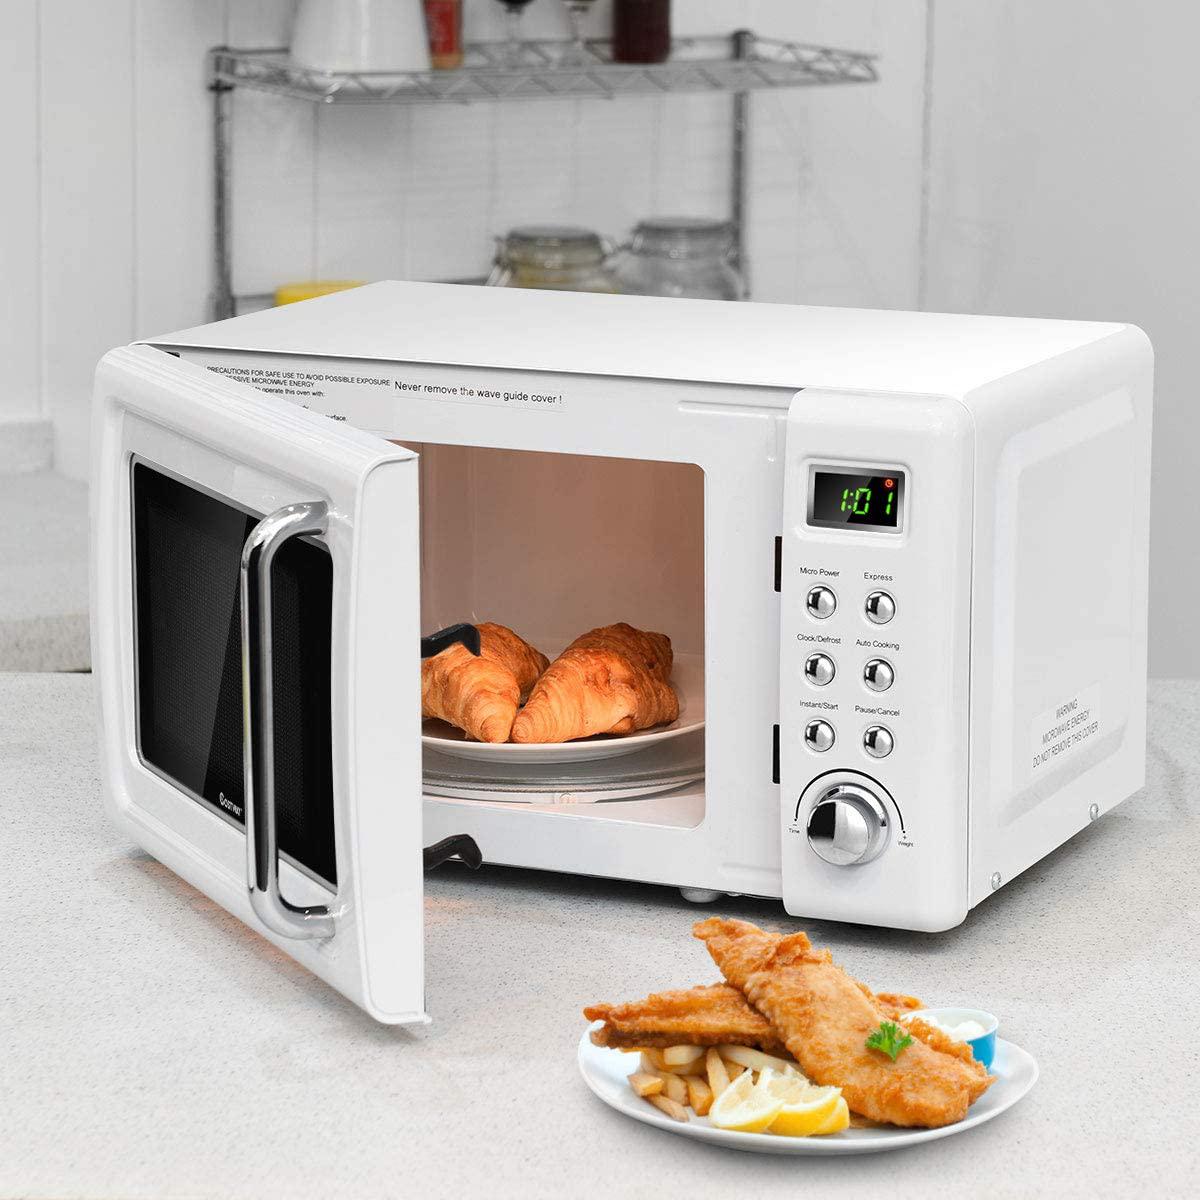 Nightcore retro countertop microwave oven, large 0.7cu.ft, 700-watt, cold rolled steel countertop with time setting, glass turntable pl